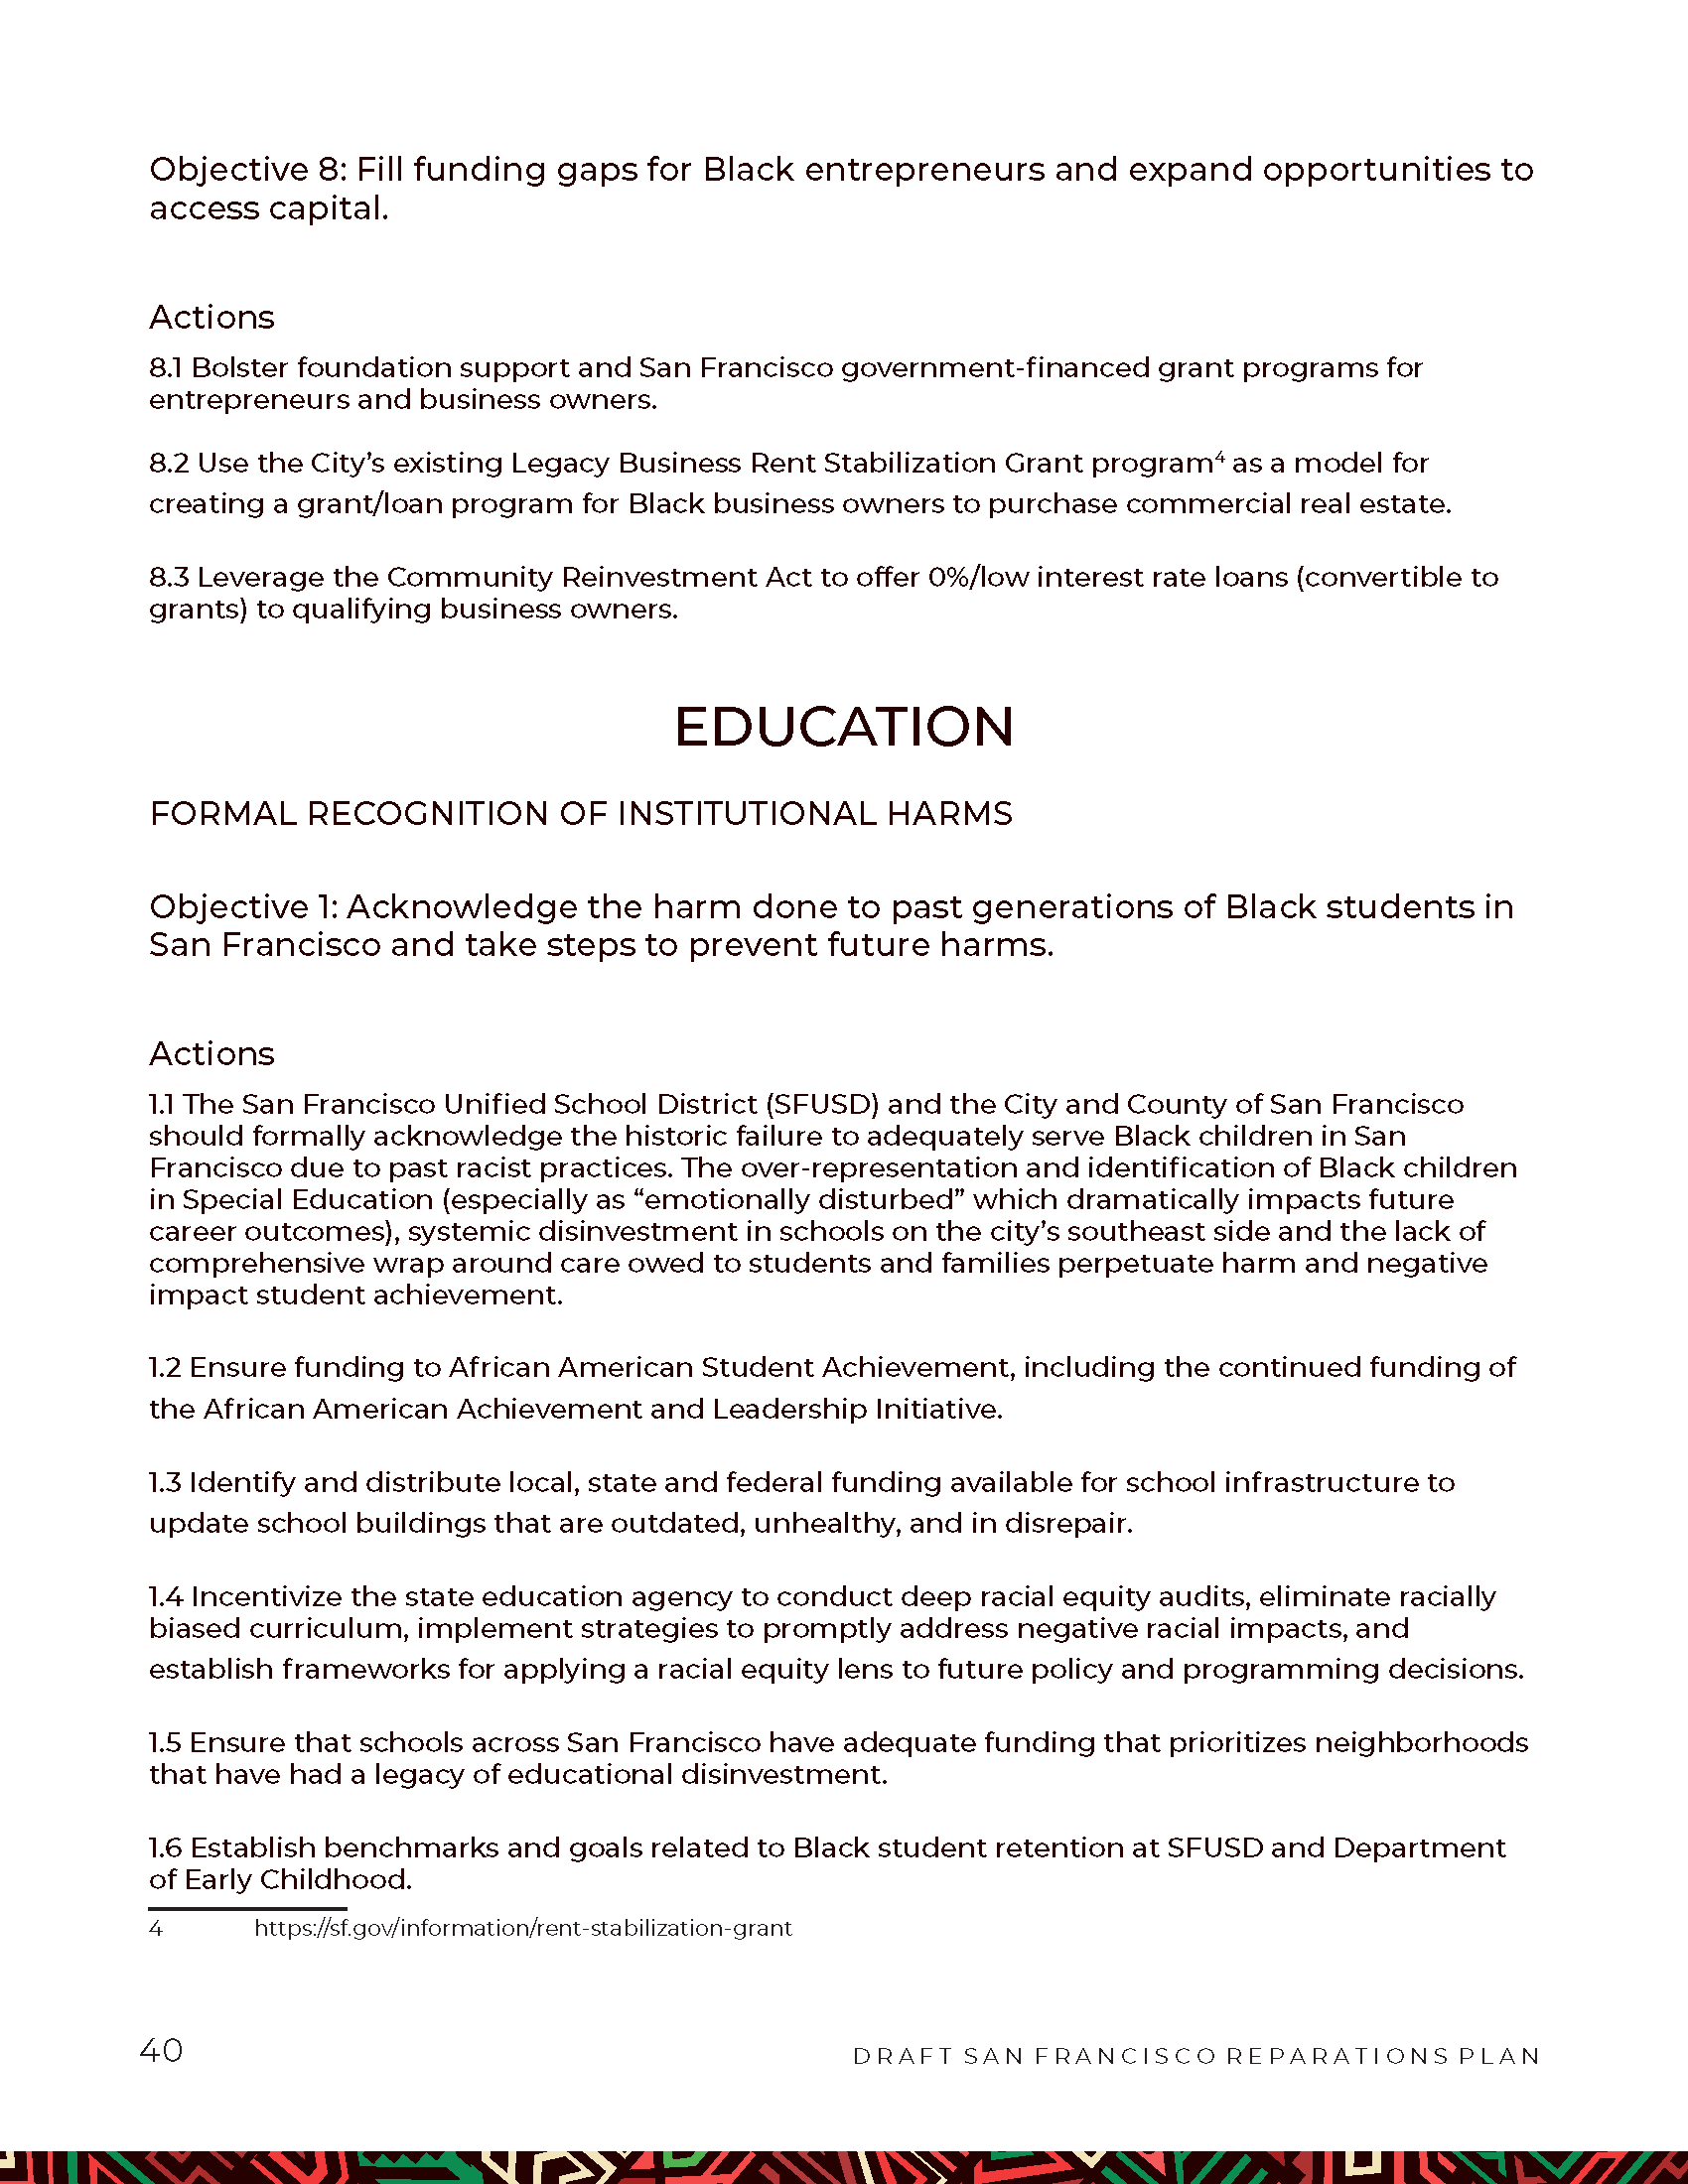 HRC Reparations 2022 Report Final_0_Page_40.png